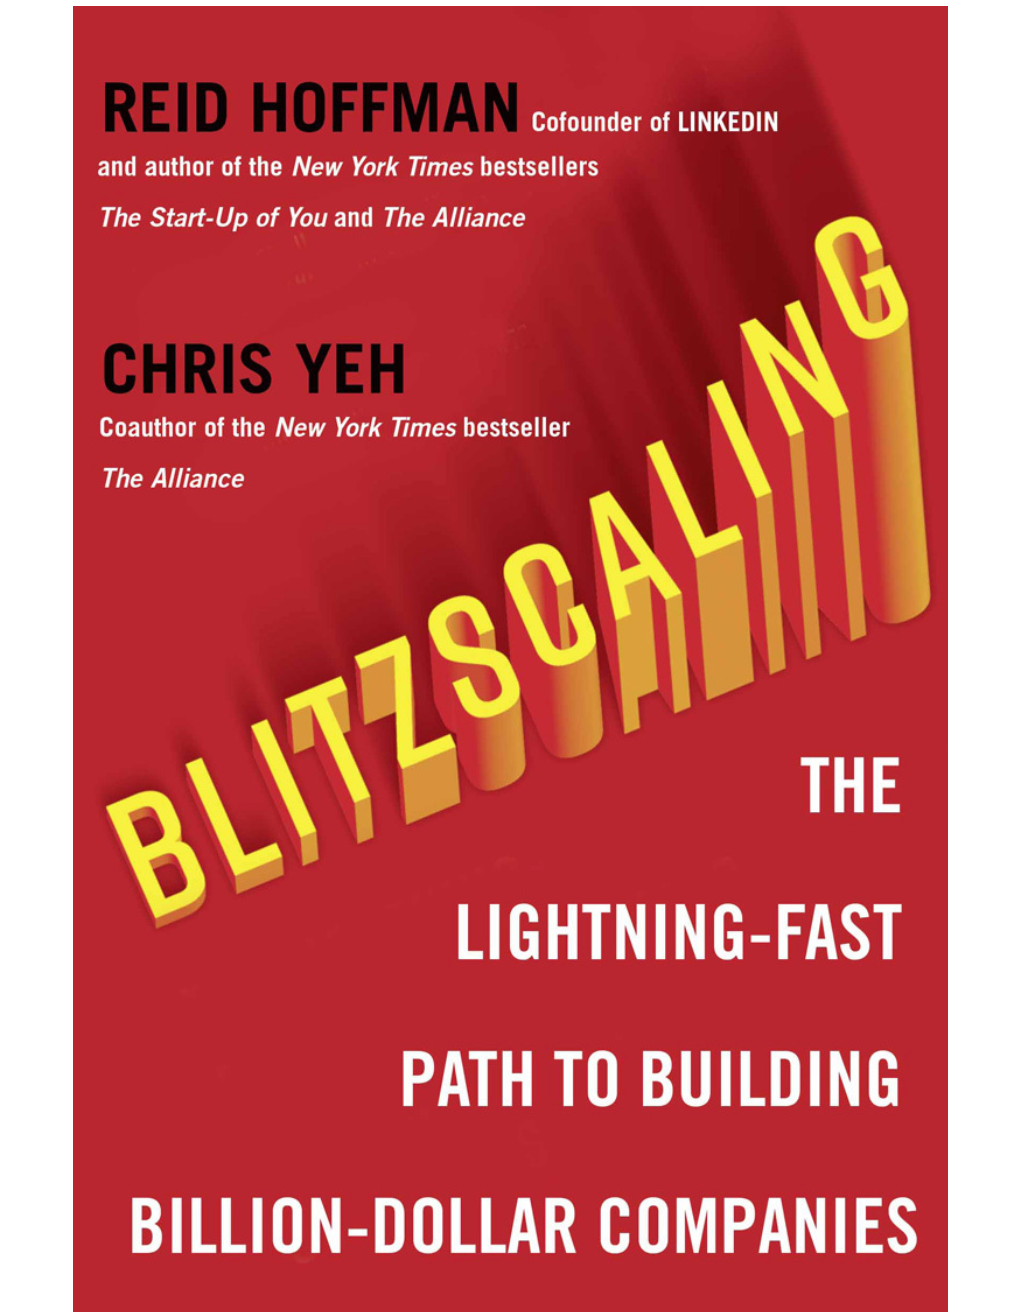 Blitzscaling: the Lightning-Fast Path to Building Massively Valuable